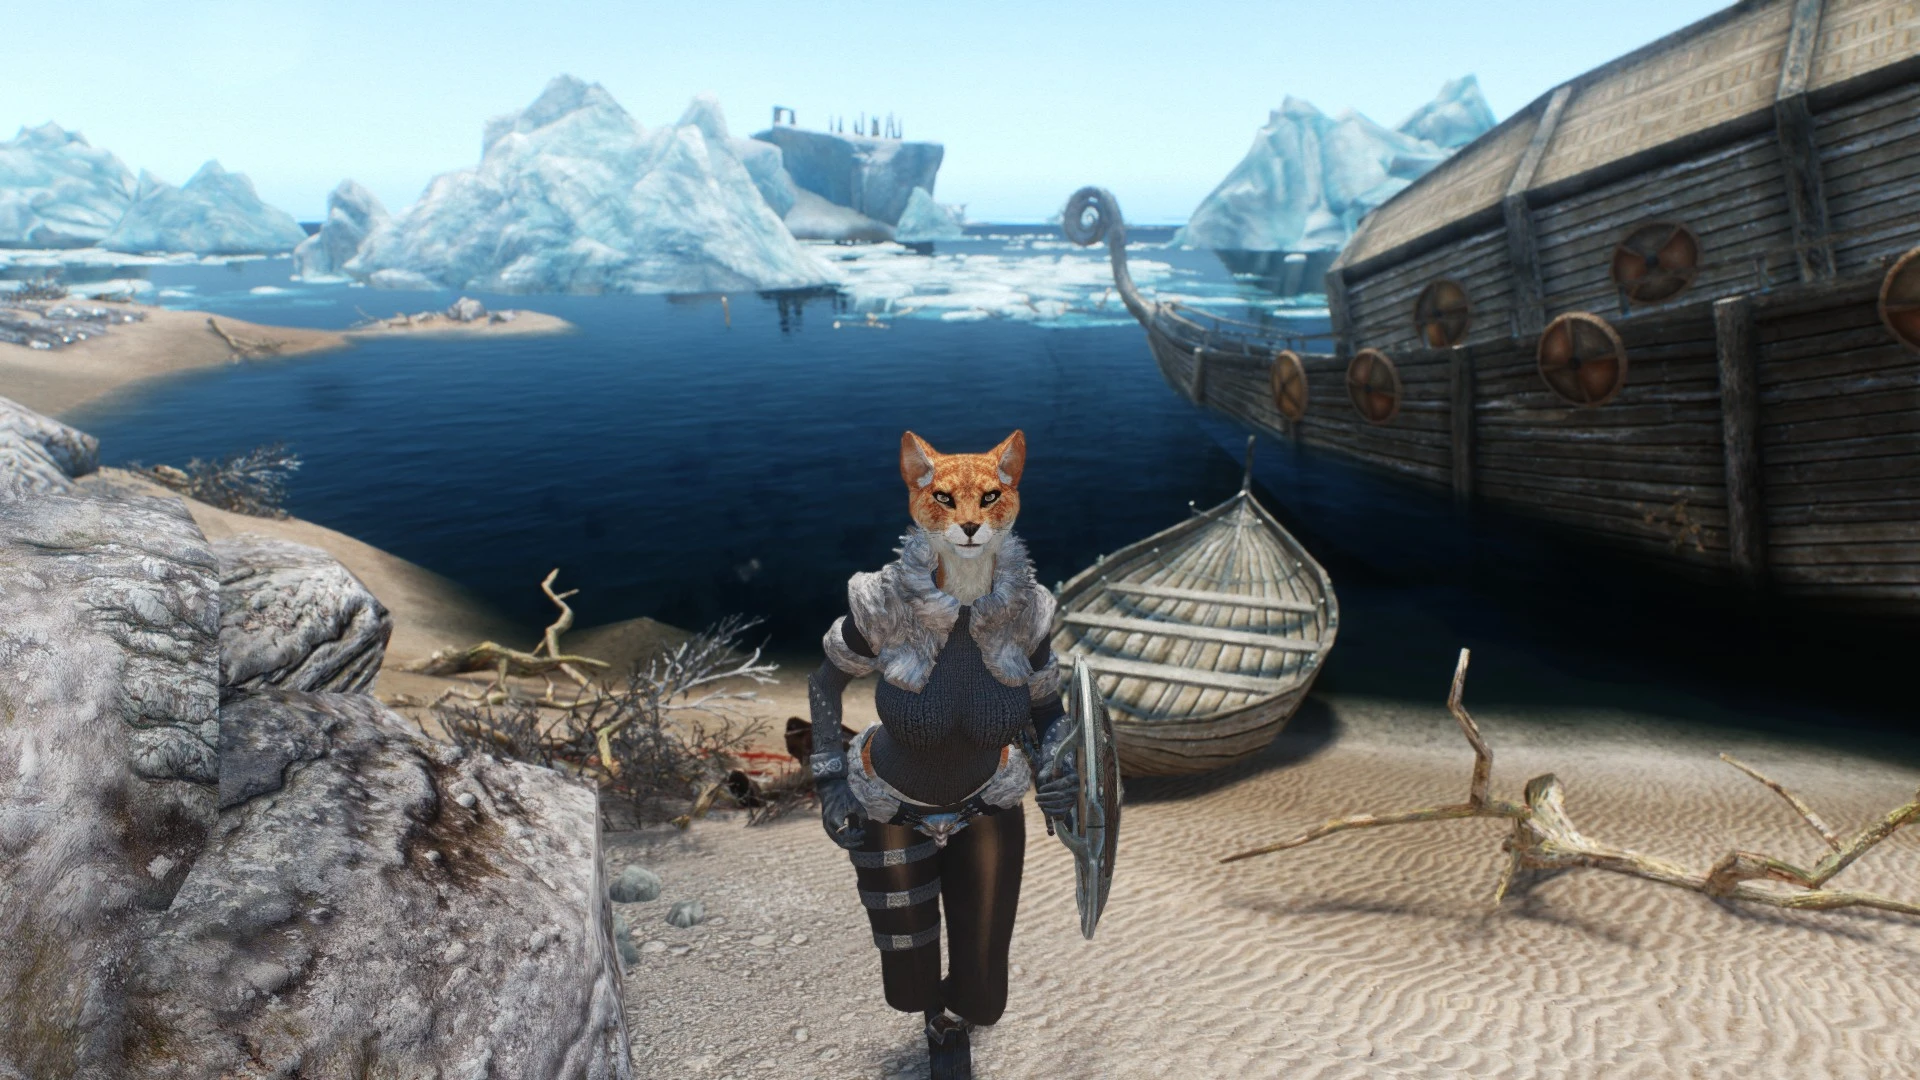 Image is about Fox Race Skyrim Mod.